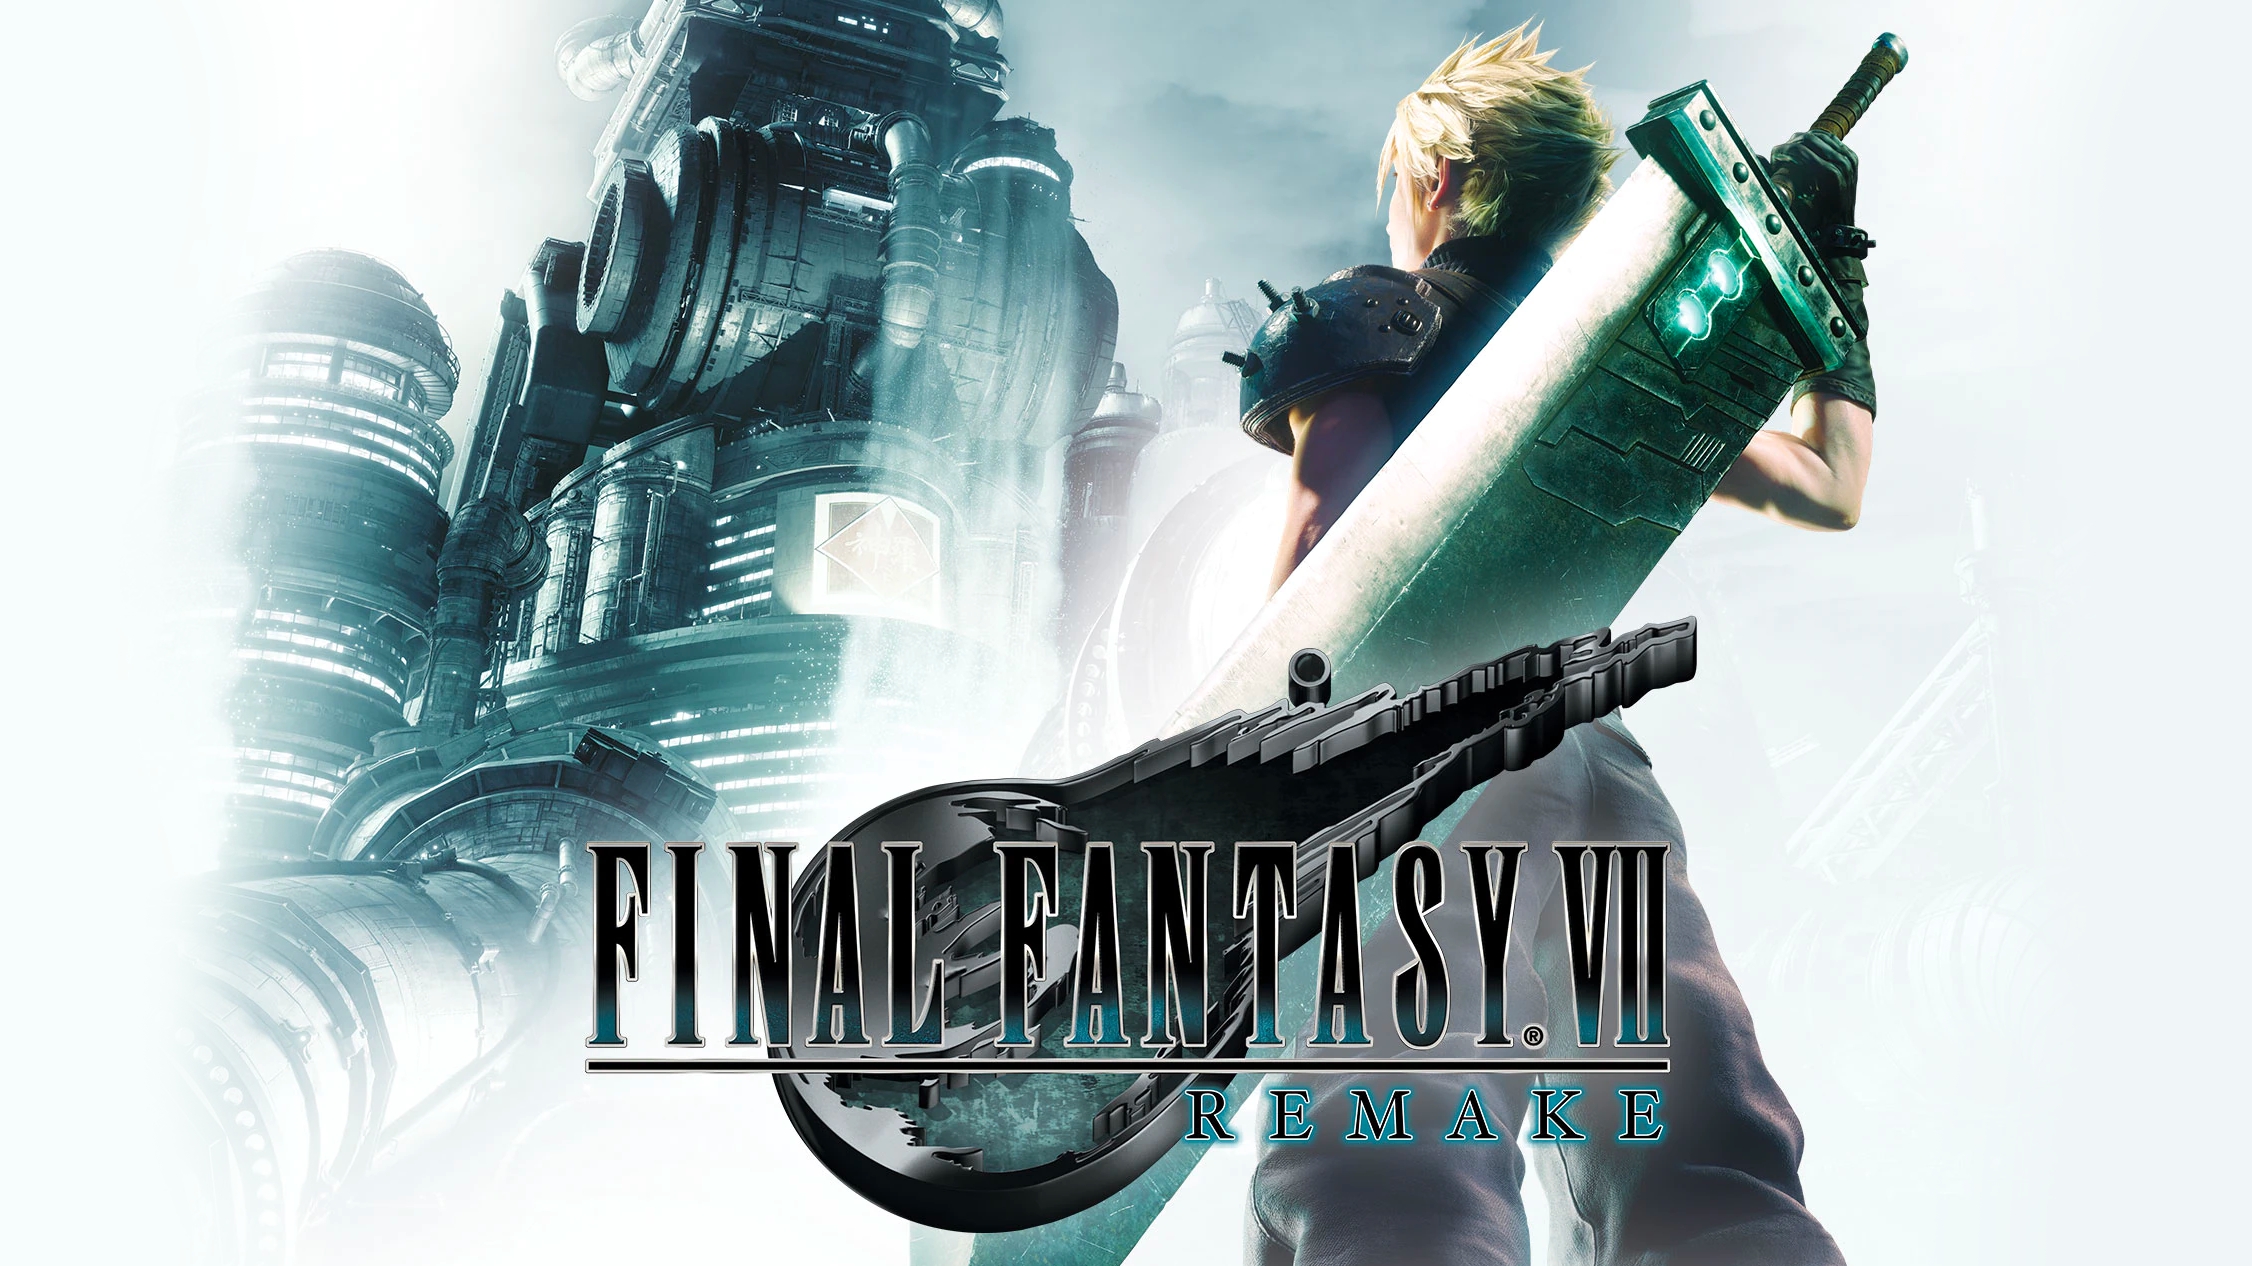 Final Fantasy 7 Remake Listed for Xbox One by GAME